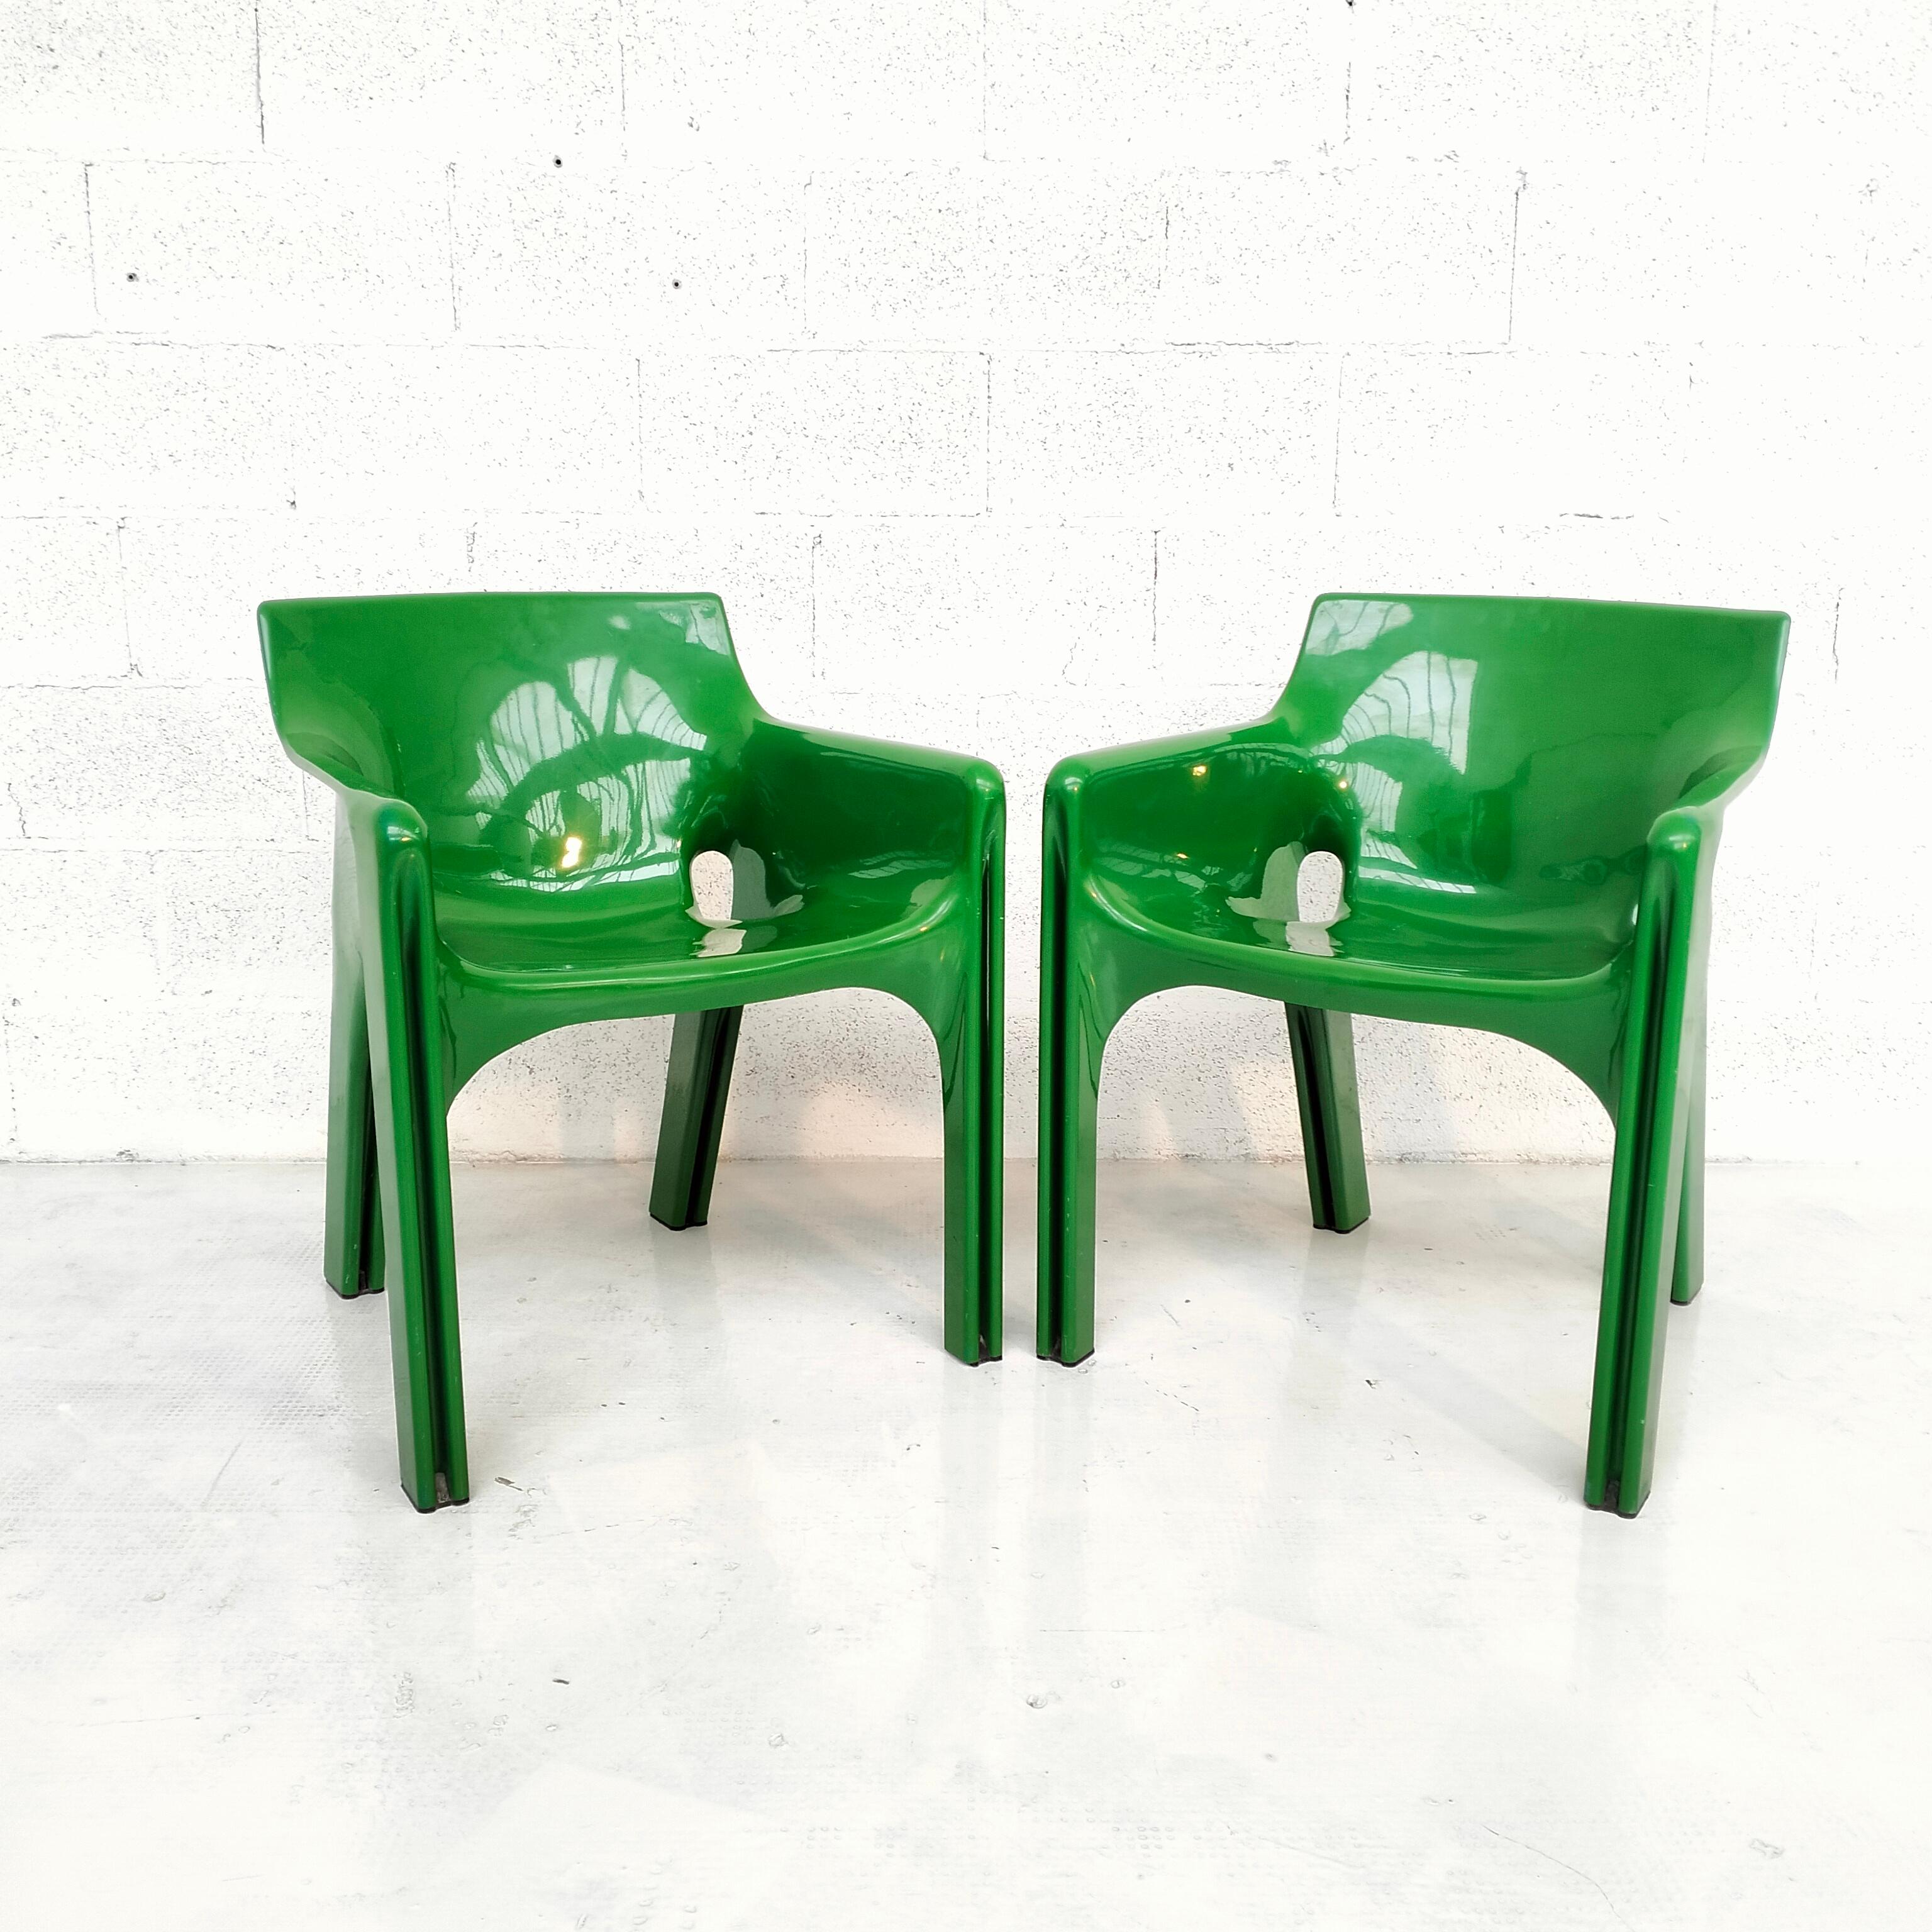 Late 20th Century 2 green Gaudì chairs by Vico Magistretti for Artemide 70s